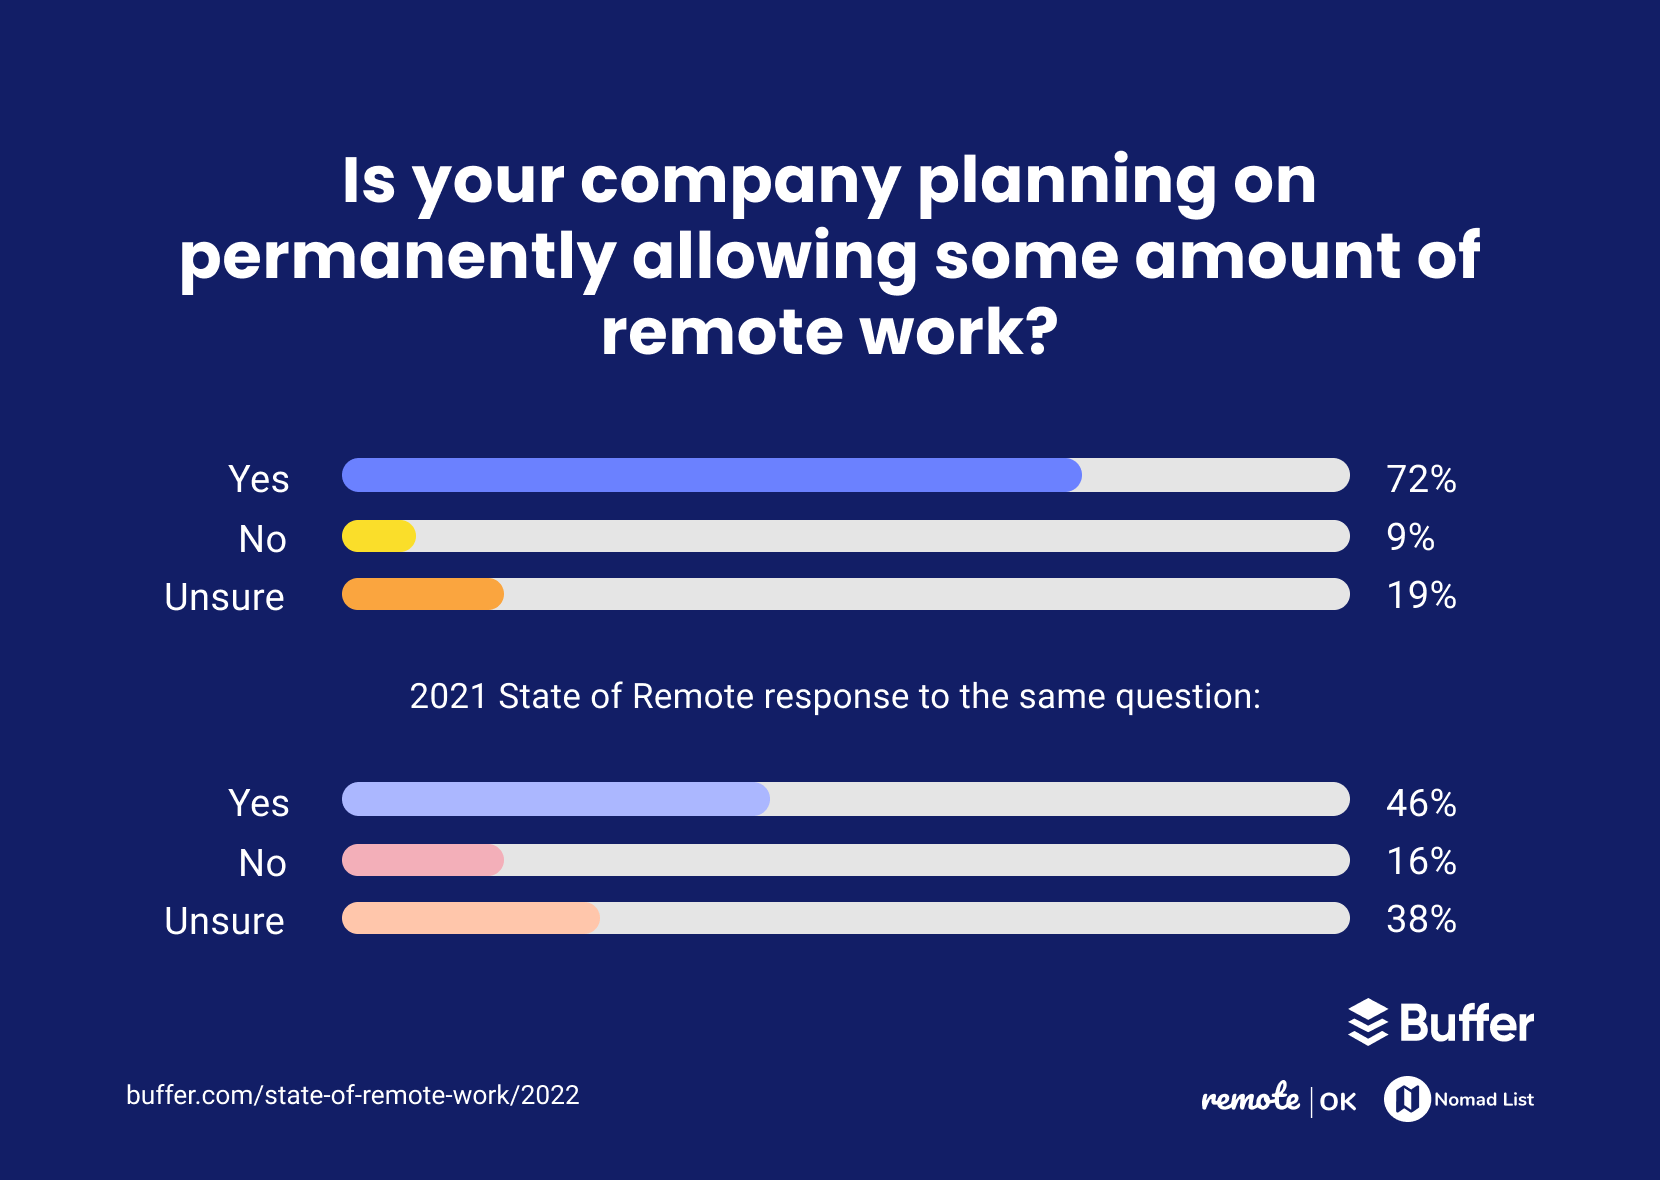 72% of companies questioned in 2022 were considering allowing some remote work - up 26% from 2021